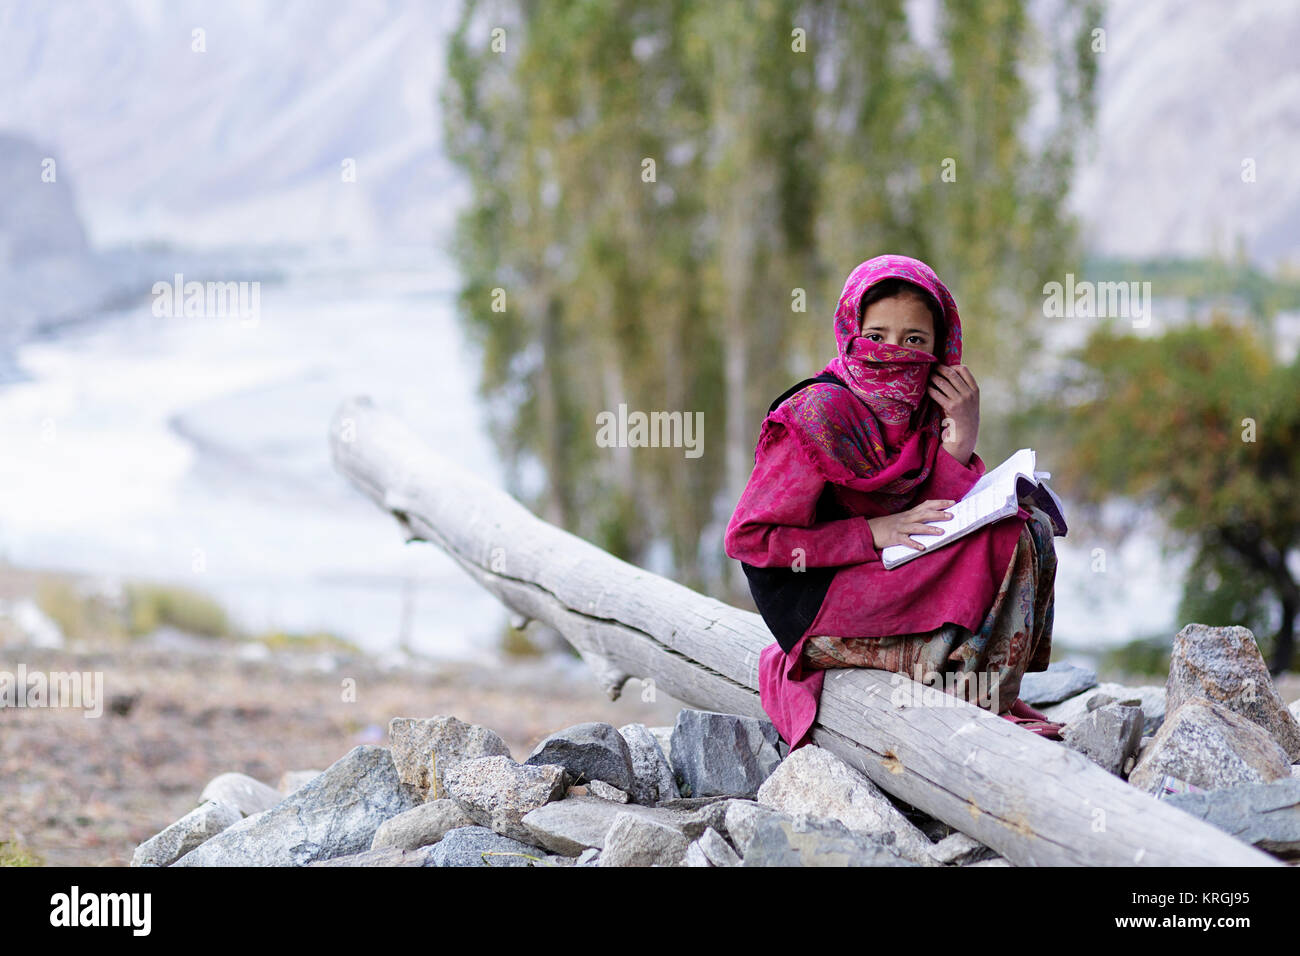 A young balti girl sitting on a branch and covering her face with a colorful scarf, Turtuk, Nubra valley, Ladakh, Jammu and Kashmir, India. Stock Photo